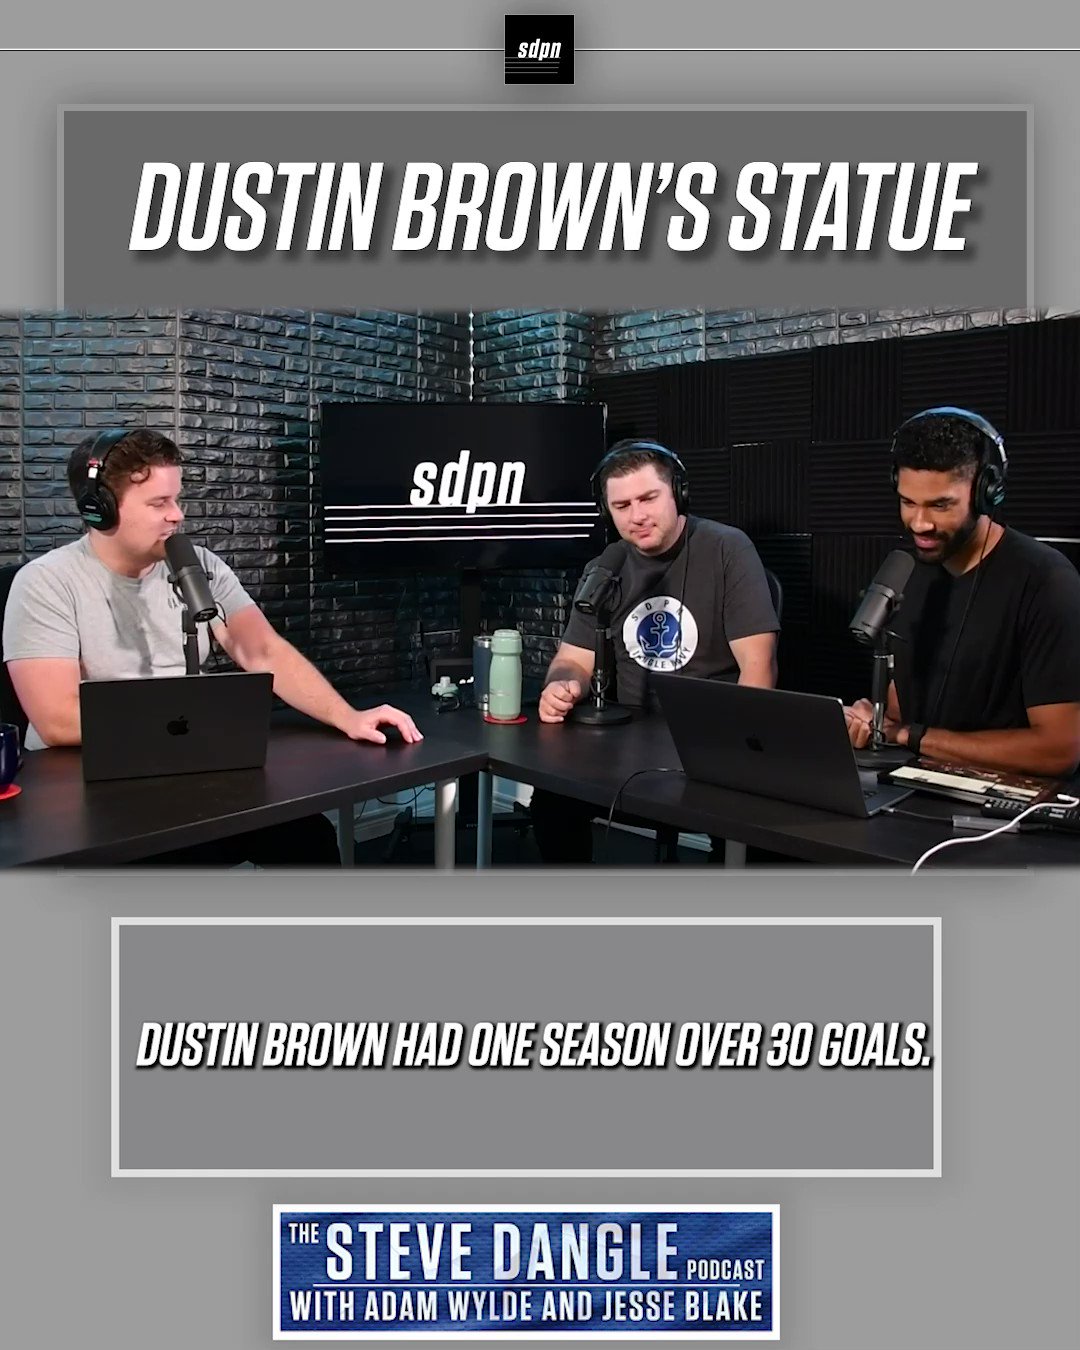 Does Dustin Brown really deserve his number retired and a statue